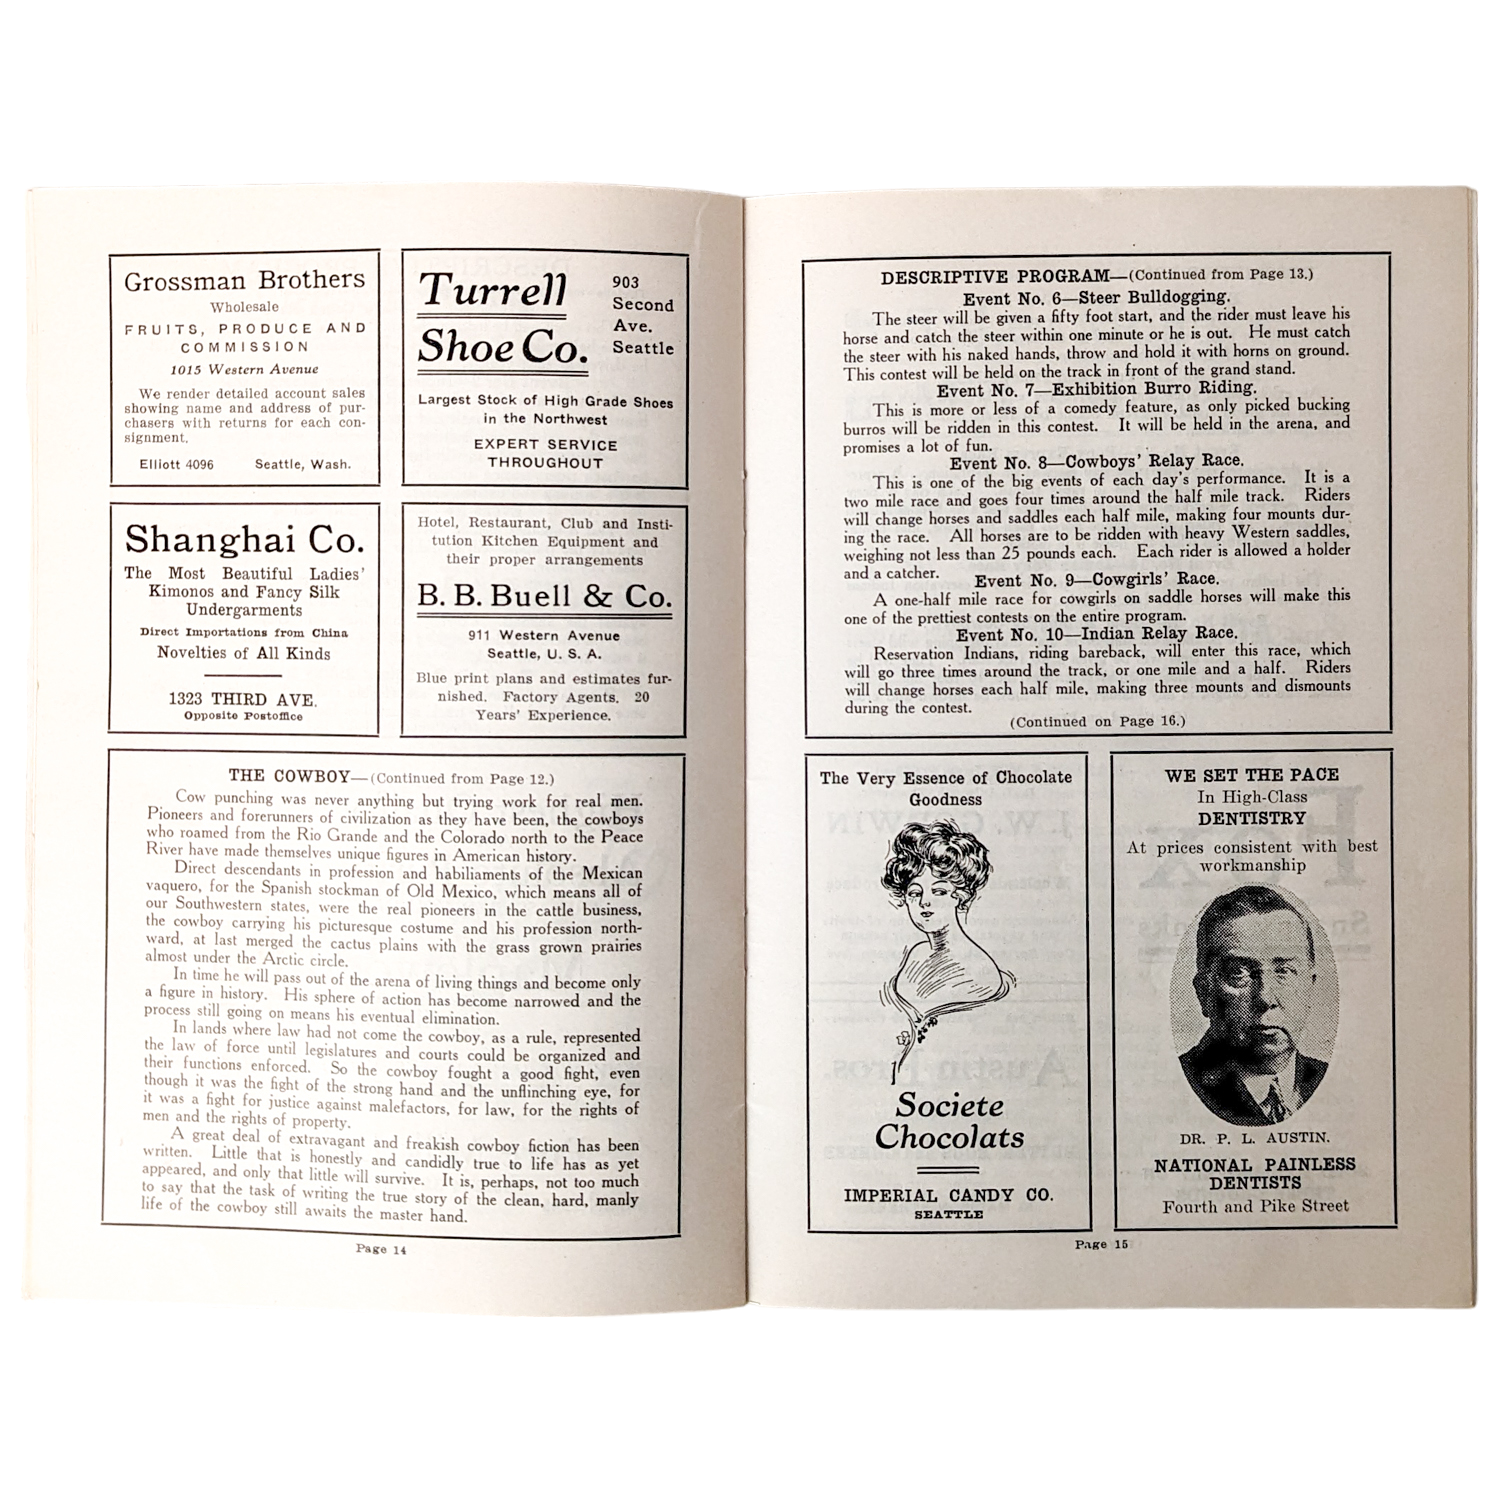 Antique Seattle Rodeo Program from 1915